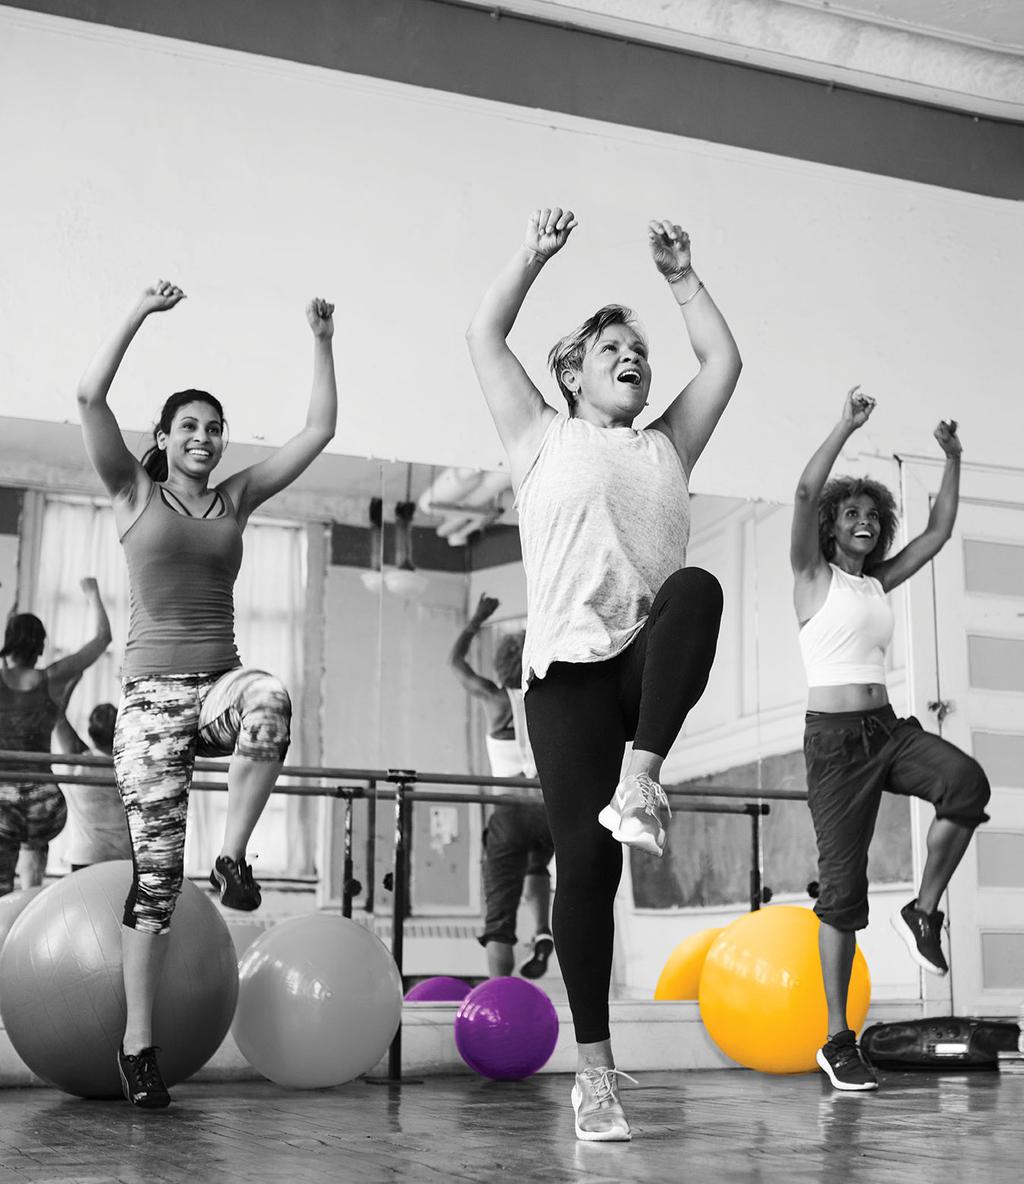 Healthy Discount Programs Your EmblemHealth membership saves you money with discount programs: Health Club Discounts Call 877-327-2746 to get discounts on gym or health club membership at